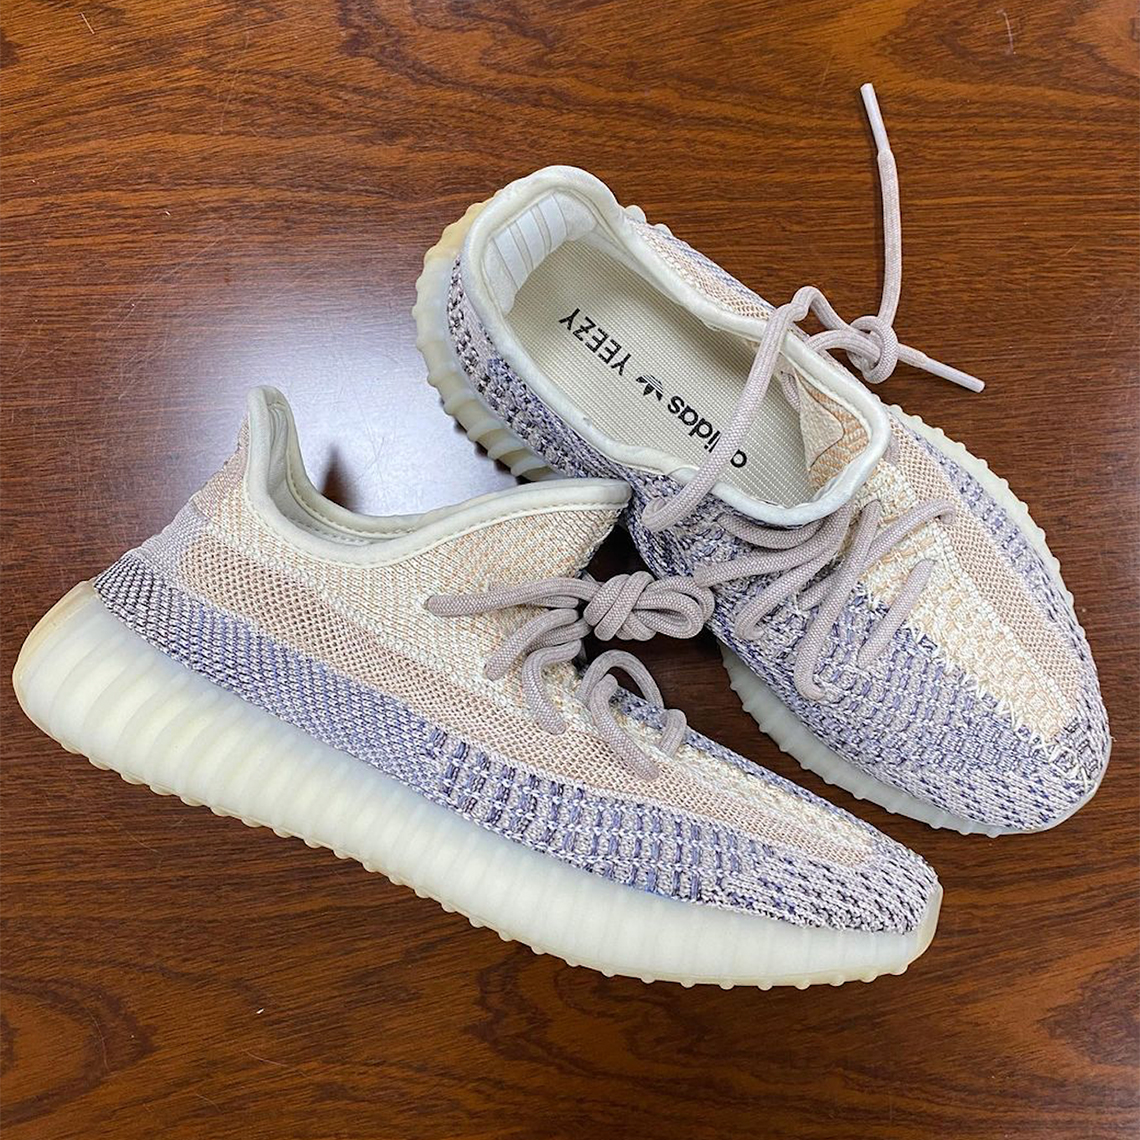 adidas Yeezy Boost 350 v2 Ash Pearl Release Date | SneakerNews.com